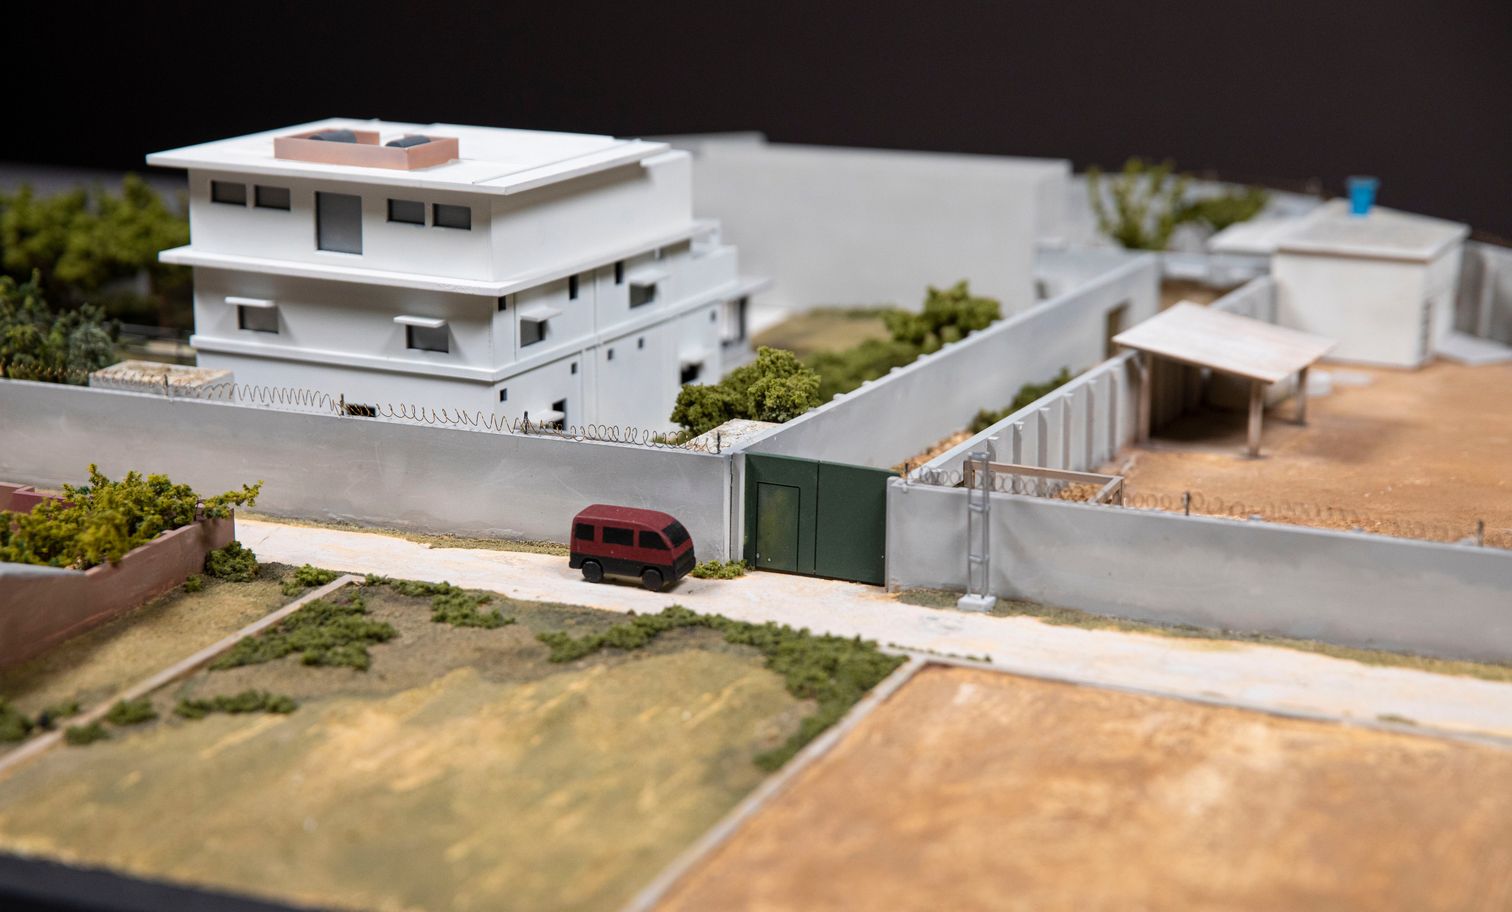 Aerial view of model of a walled white compound surrounded by predominantly brown landscape. 